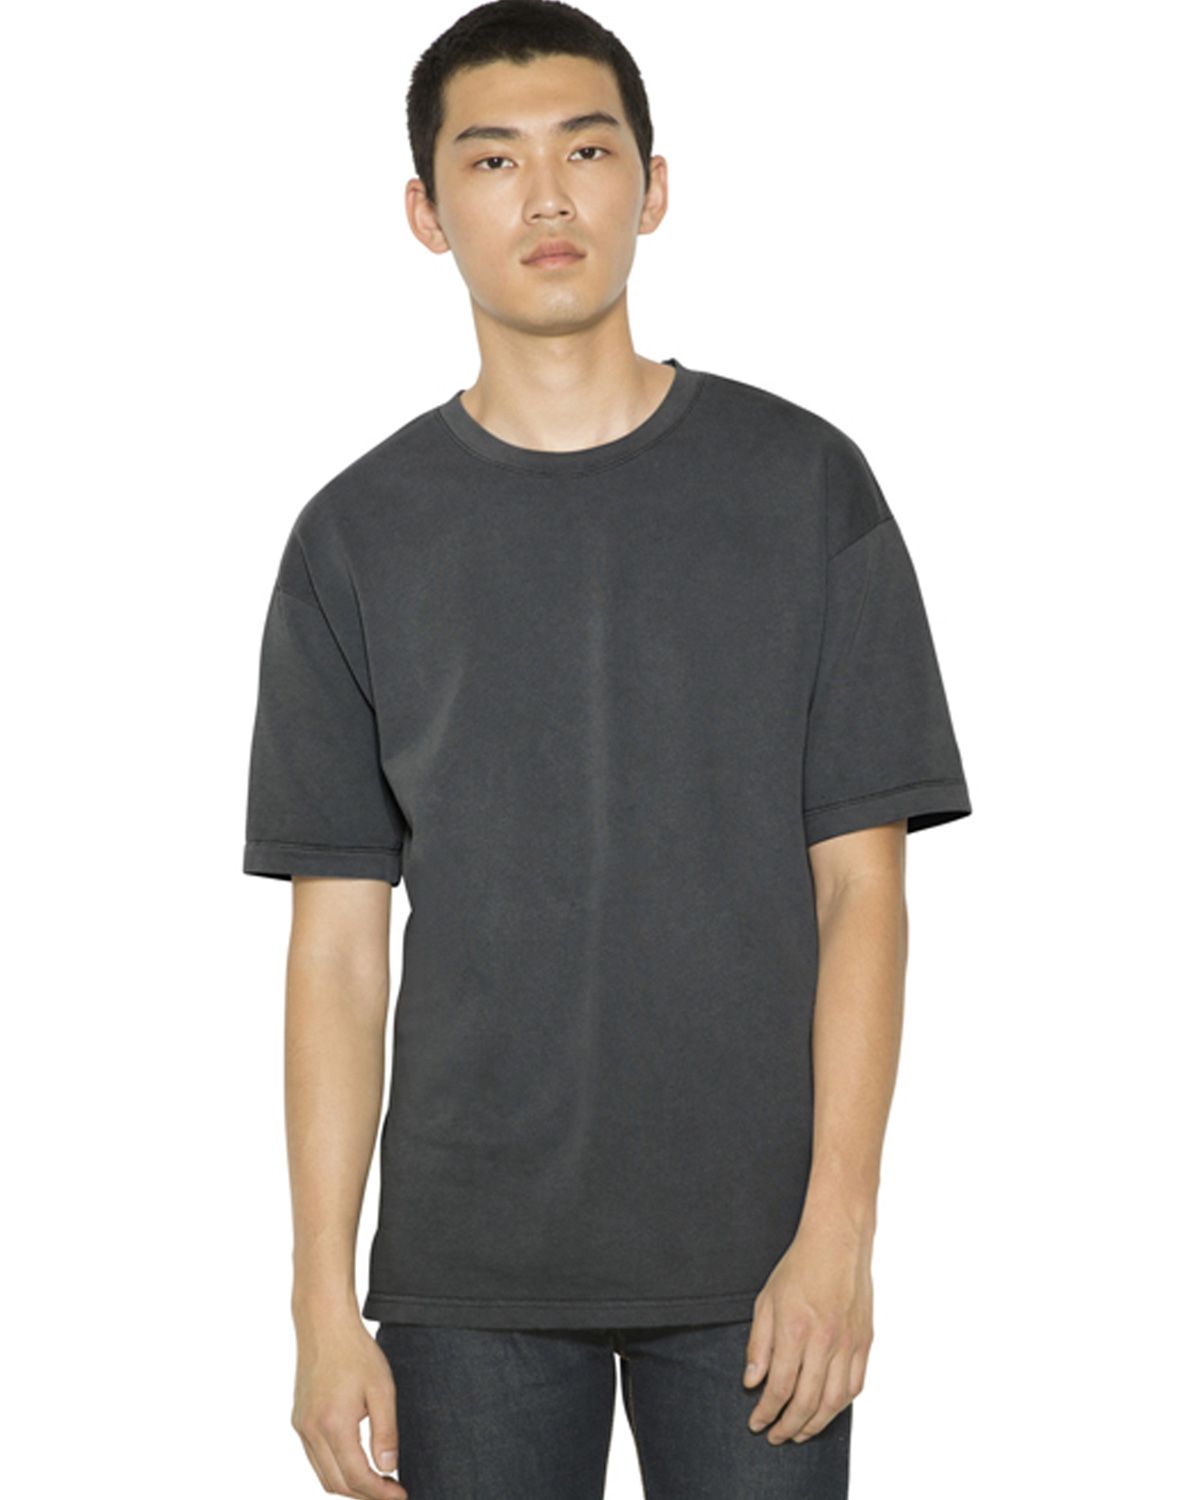 American Apparel TF402W French Terry Garment-Dyed Unisex T-Shirt